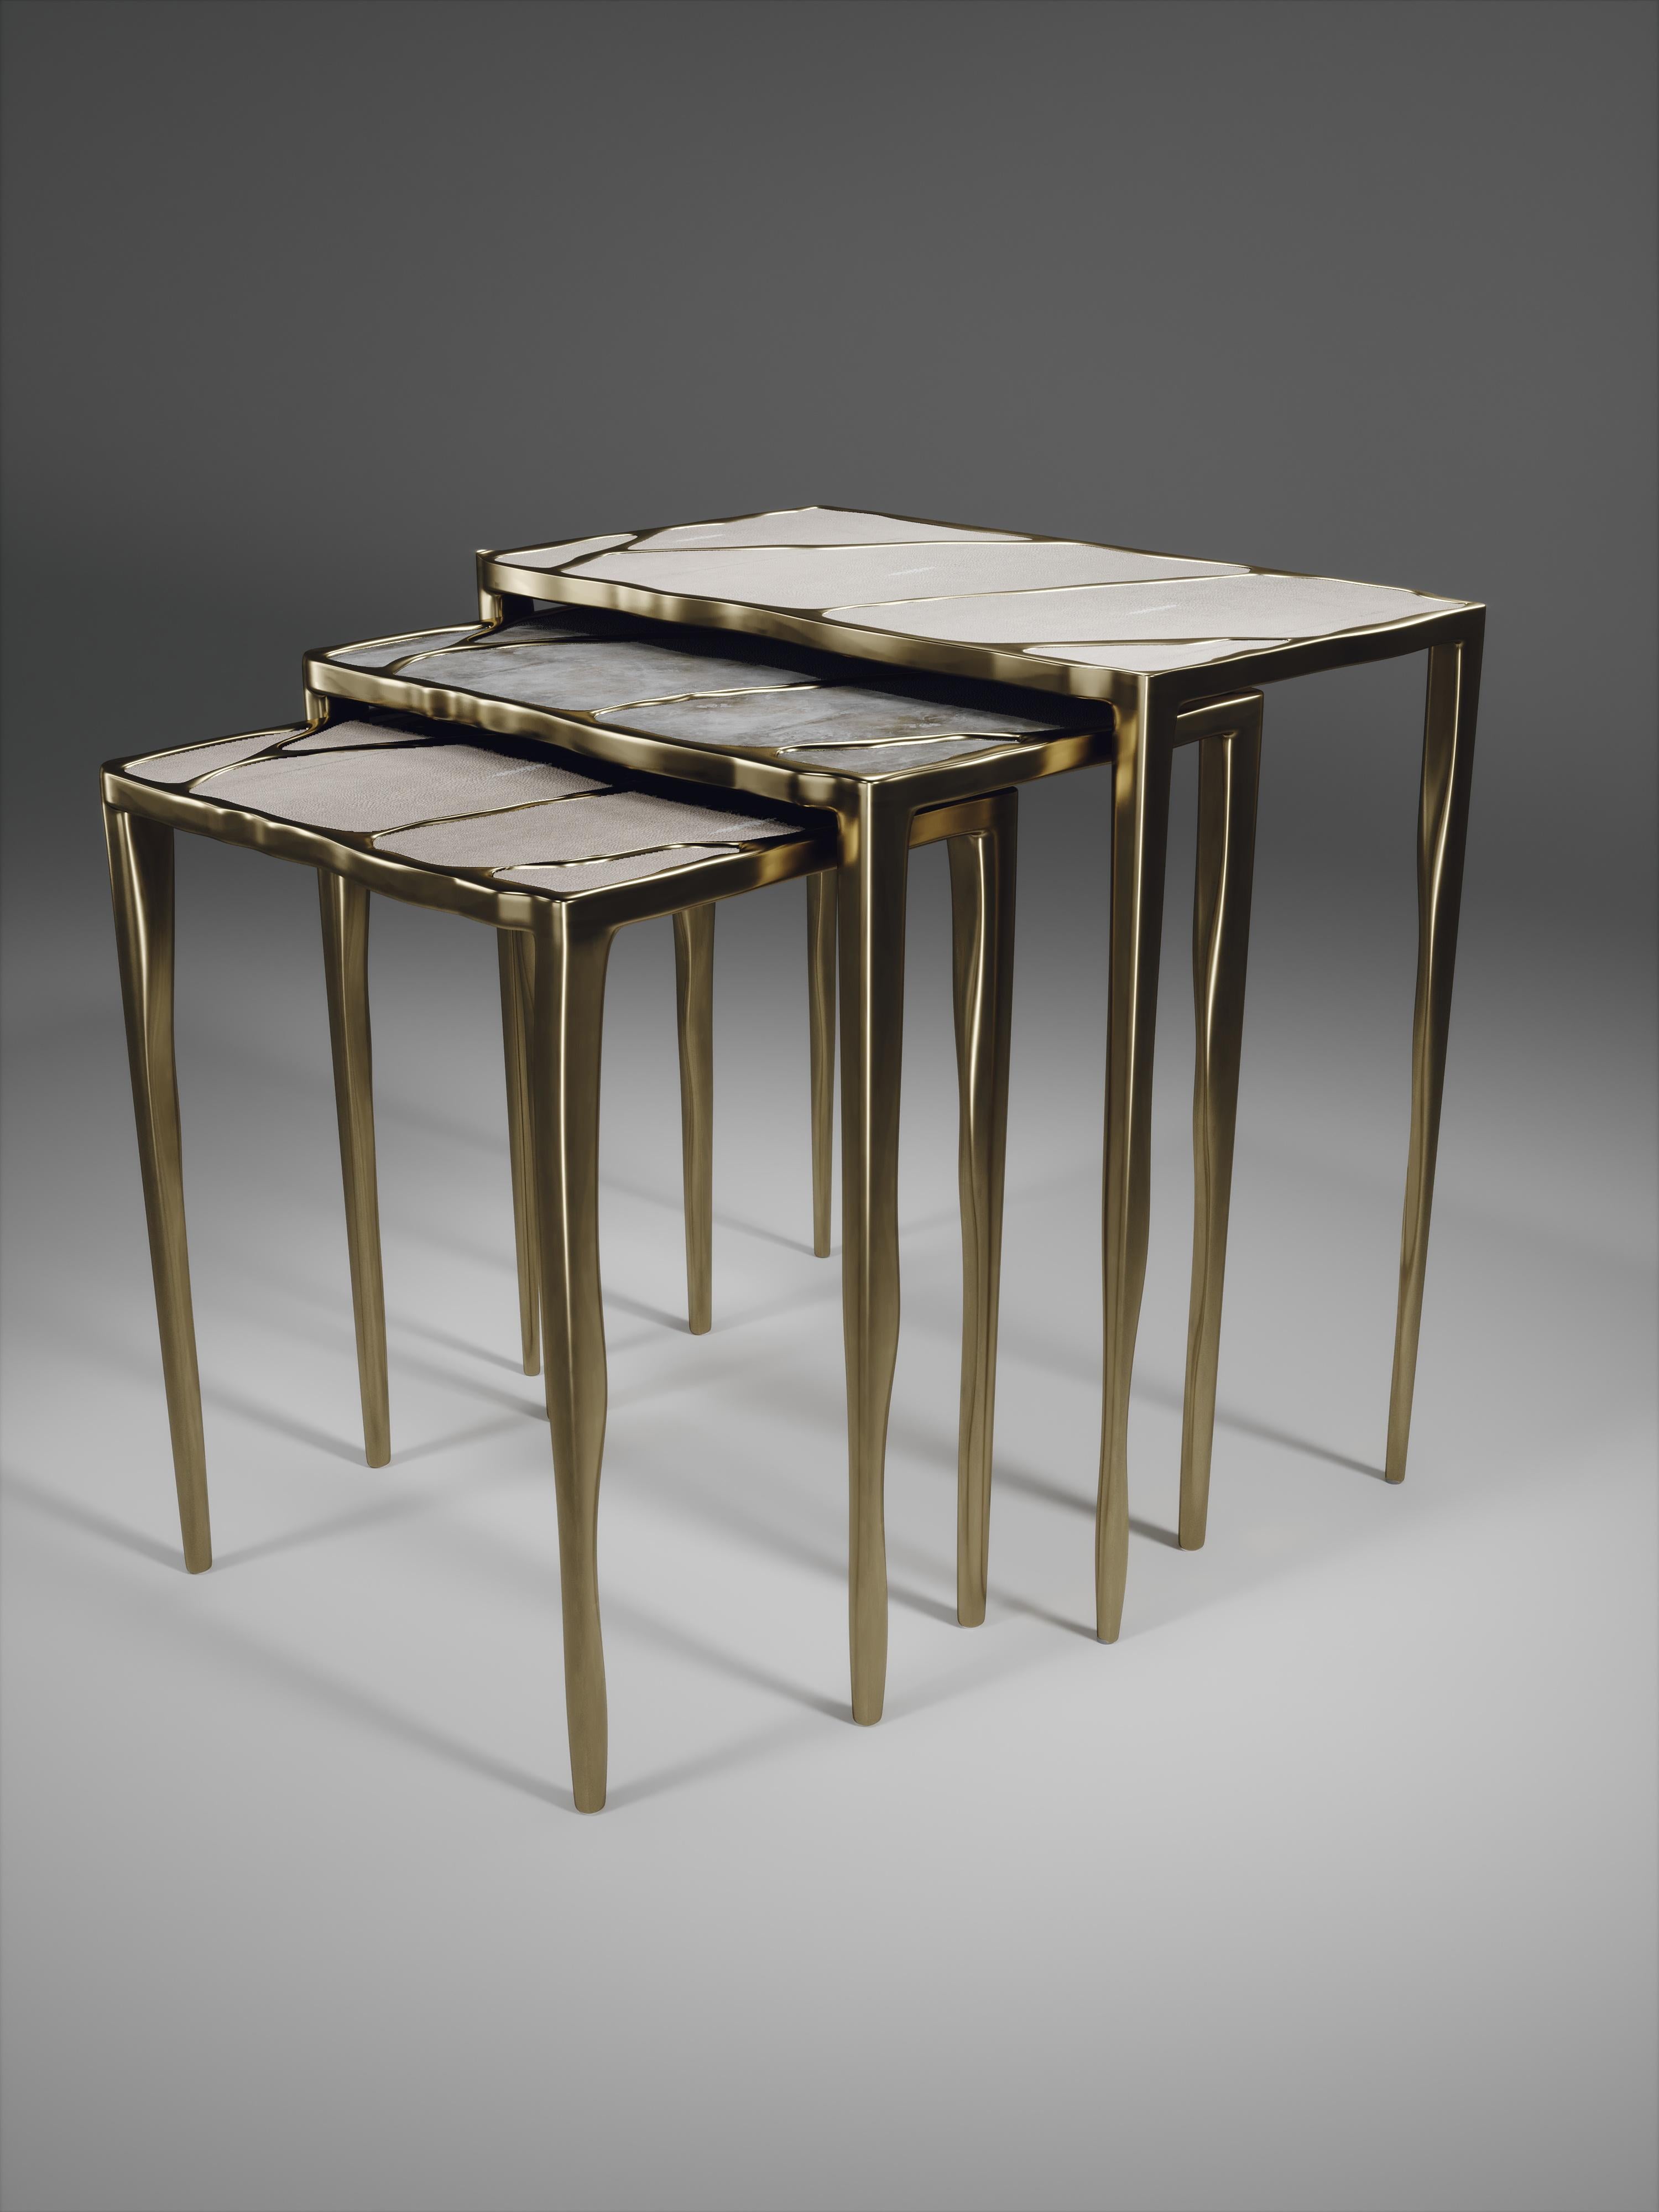 The Melting II nesting side table large, is the perfect accent piece for any living space. These are sold either as a set of 3 to create elegant and geometric shapes, or individually. This listing is for the large size only. The top is inlaid in